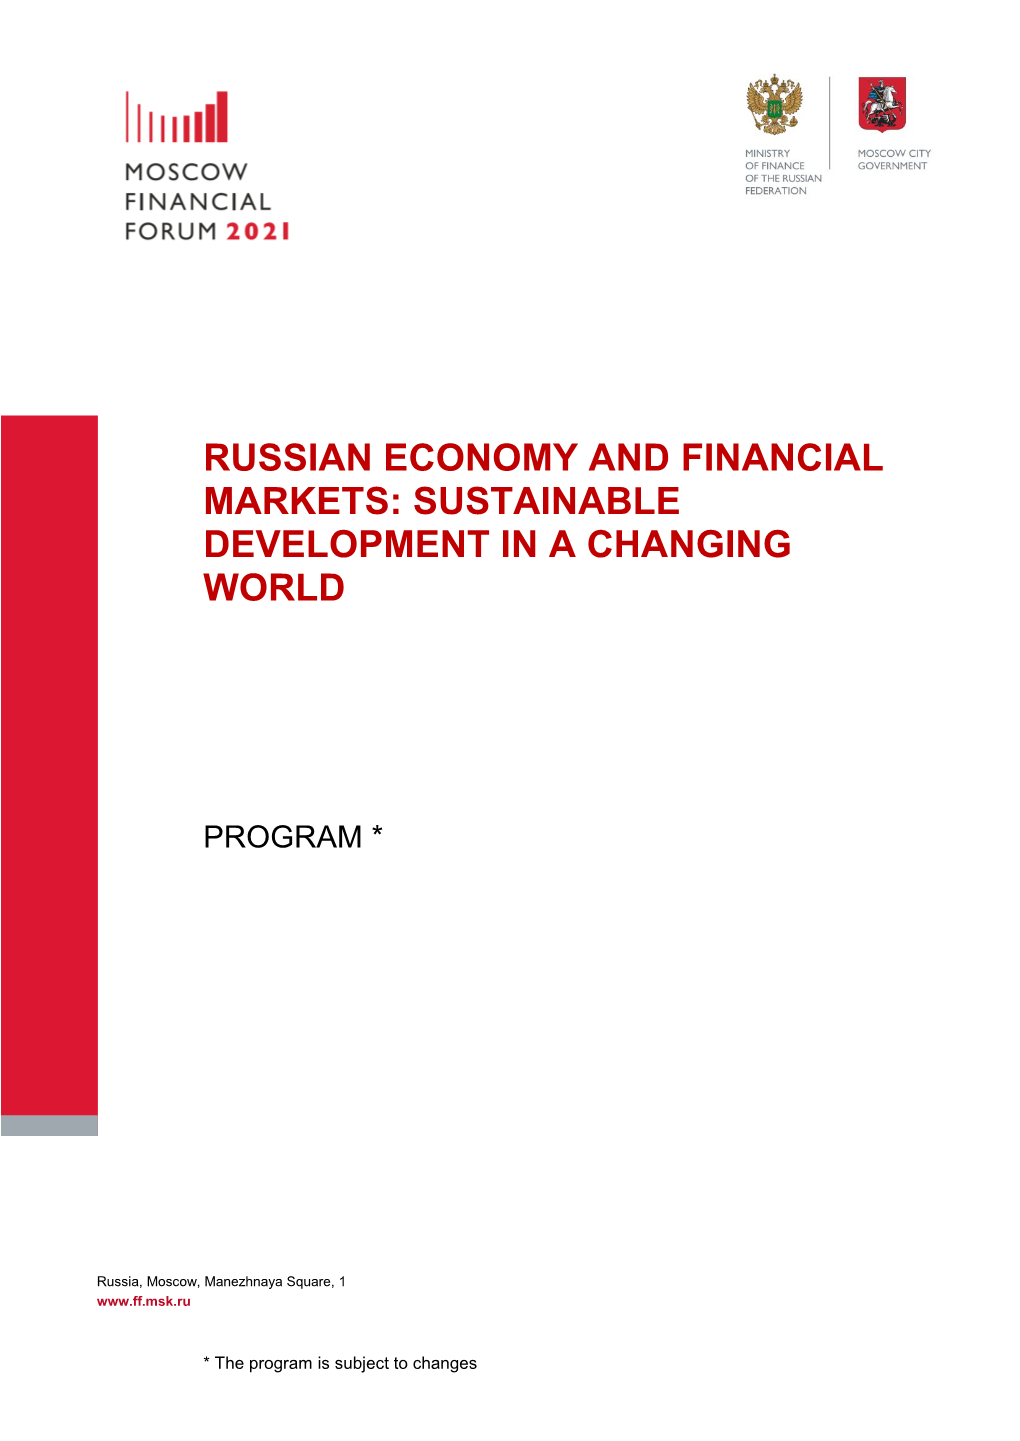 Russian Economy and Financial Markets: Sustainable Development in a Changing World